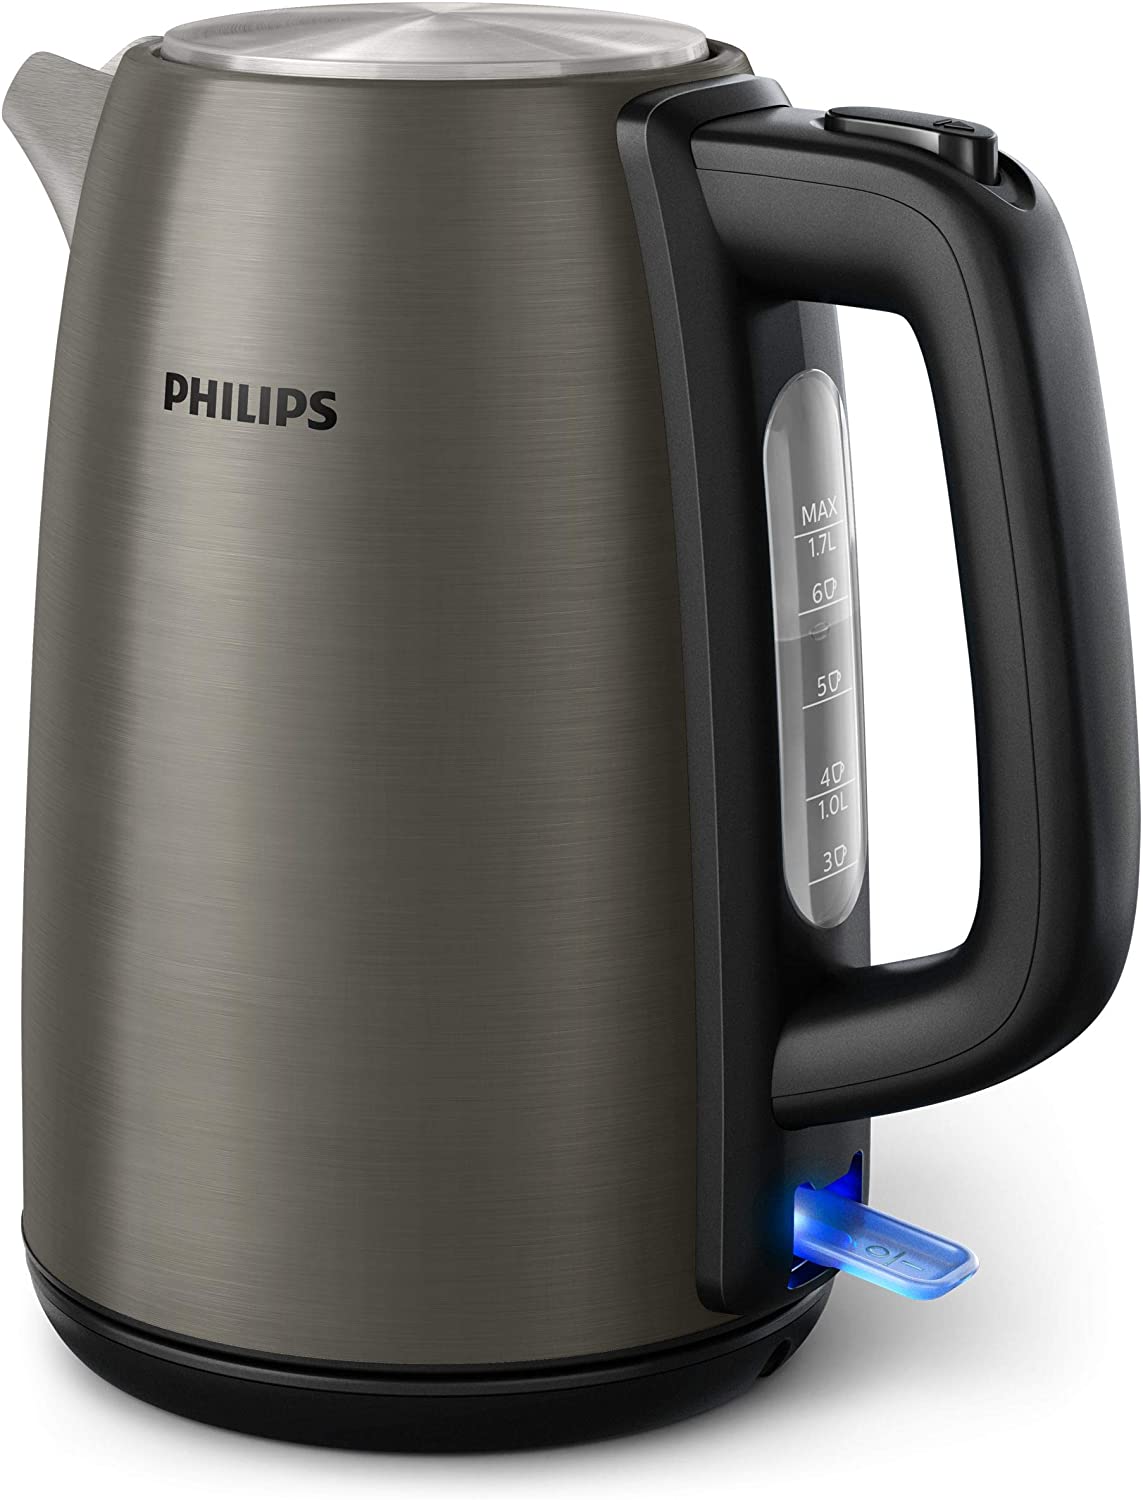 Philips Domestic Appliances Philips Daily Collection HD9352/80 – Kettle (2200 W, 0.75 m)